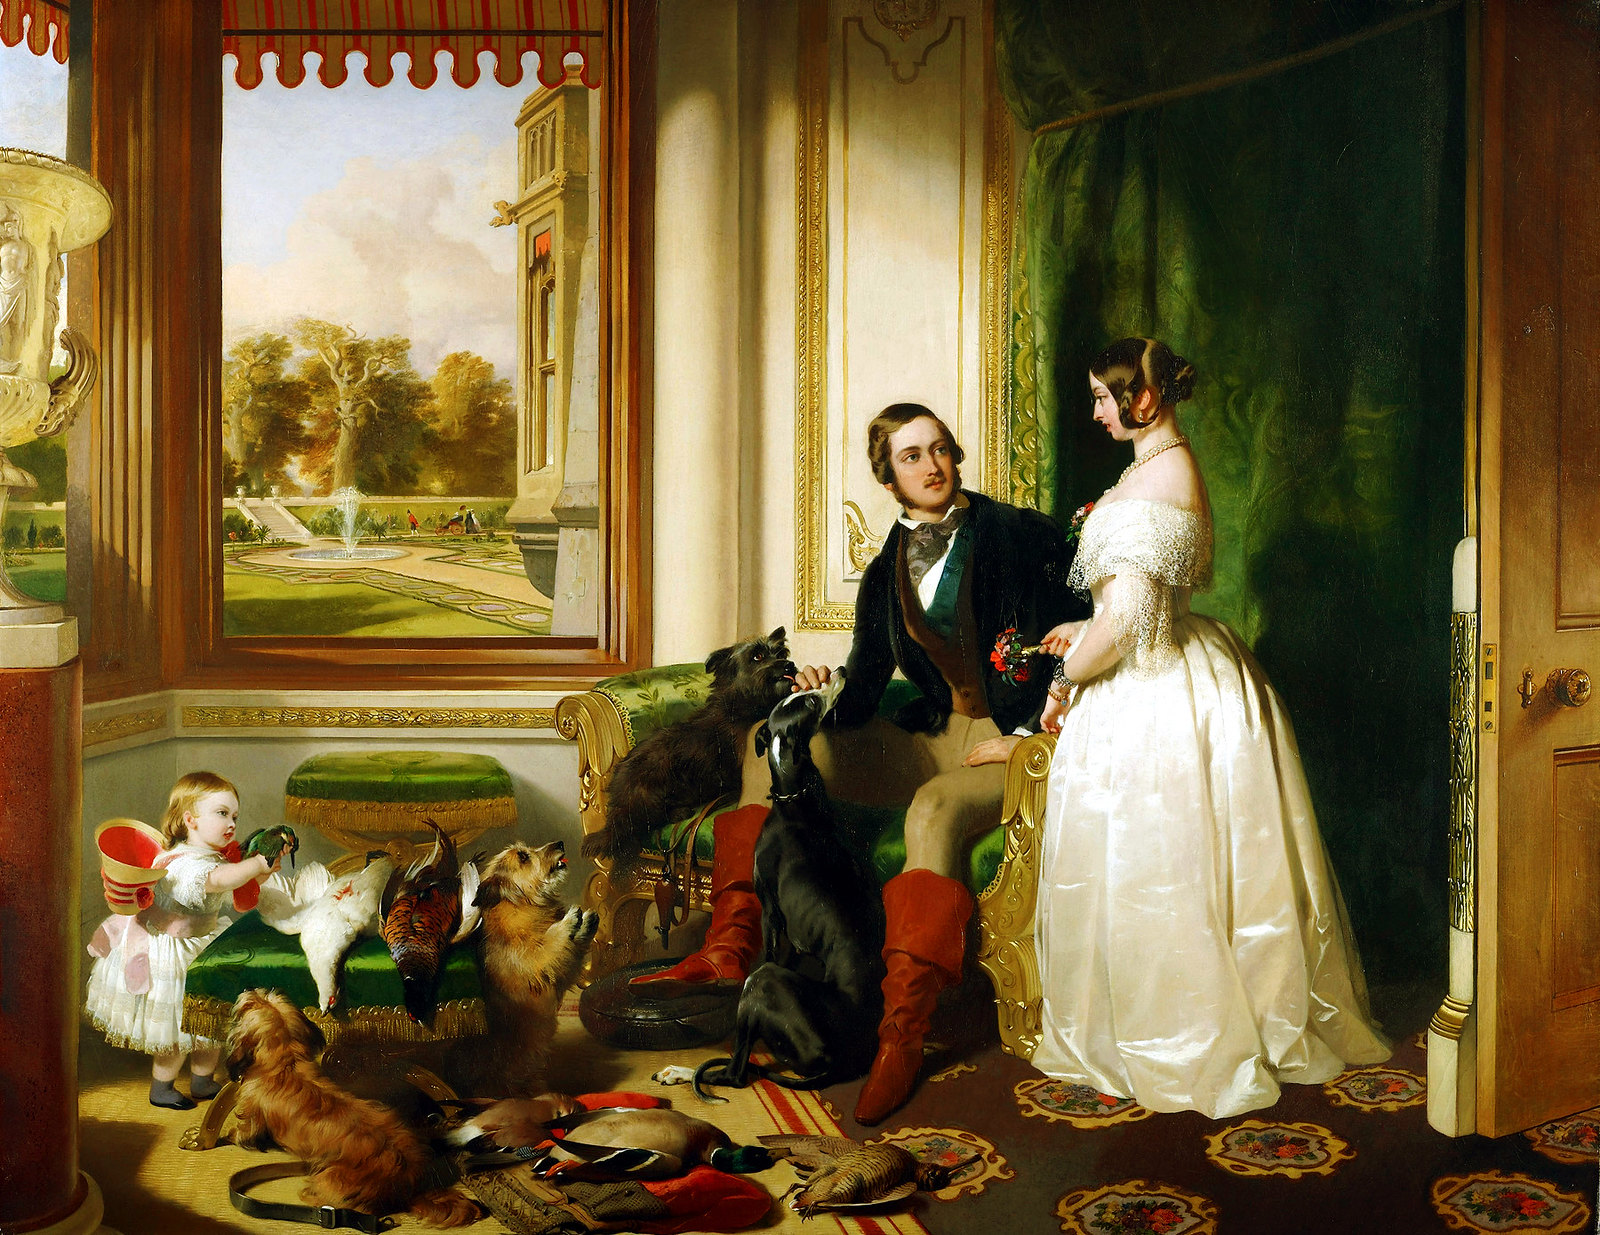 Queen Victoria and Prince Albert at home at Windsor Castle byE dwin Henry Landseer, 1843